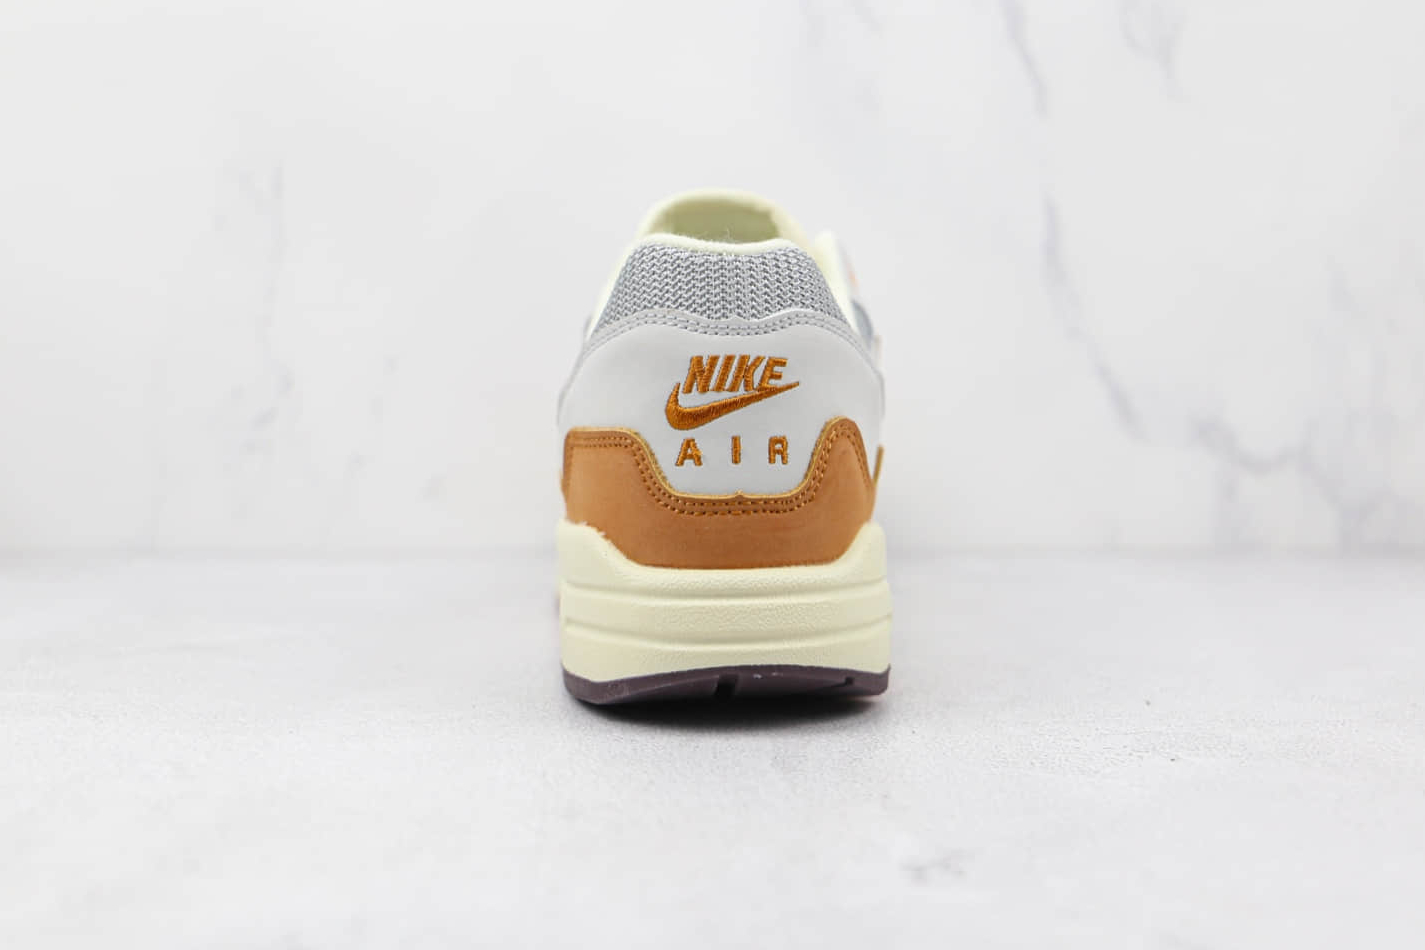 Nike Patta x Air Max 1 'Monarch' DH1348-001 - Exclusive Collaboration for Sneaker Enthusiasts!